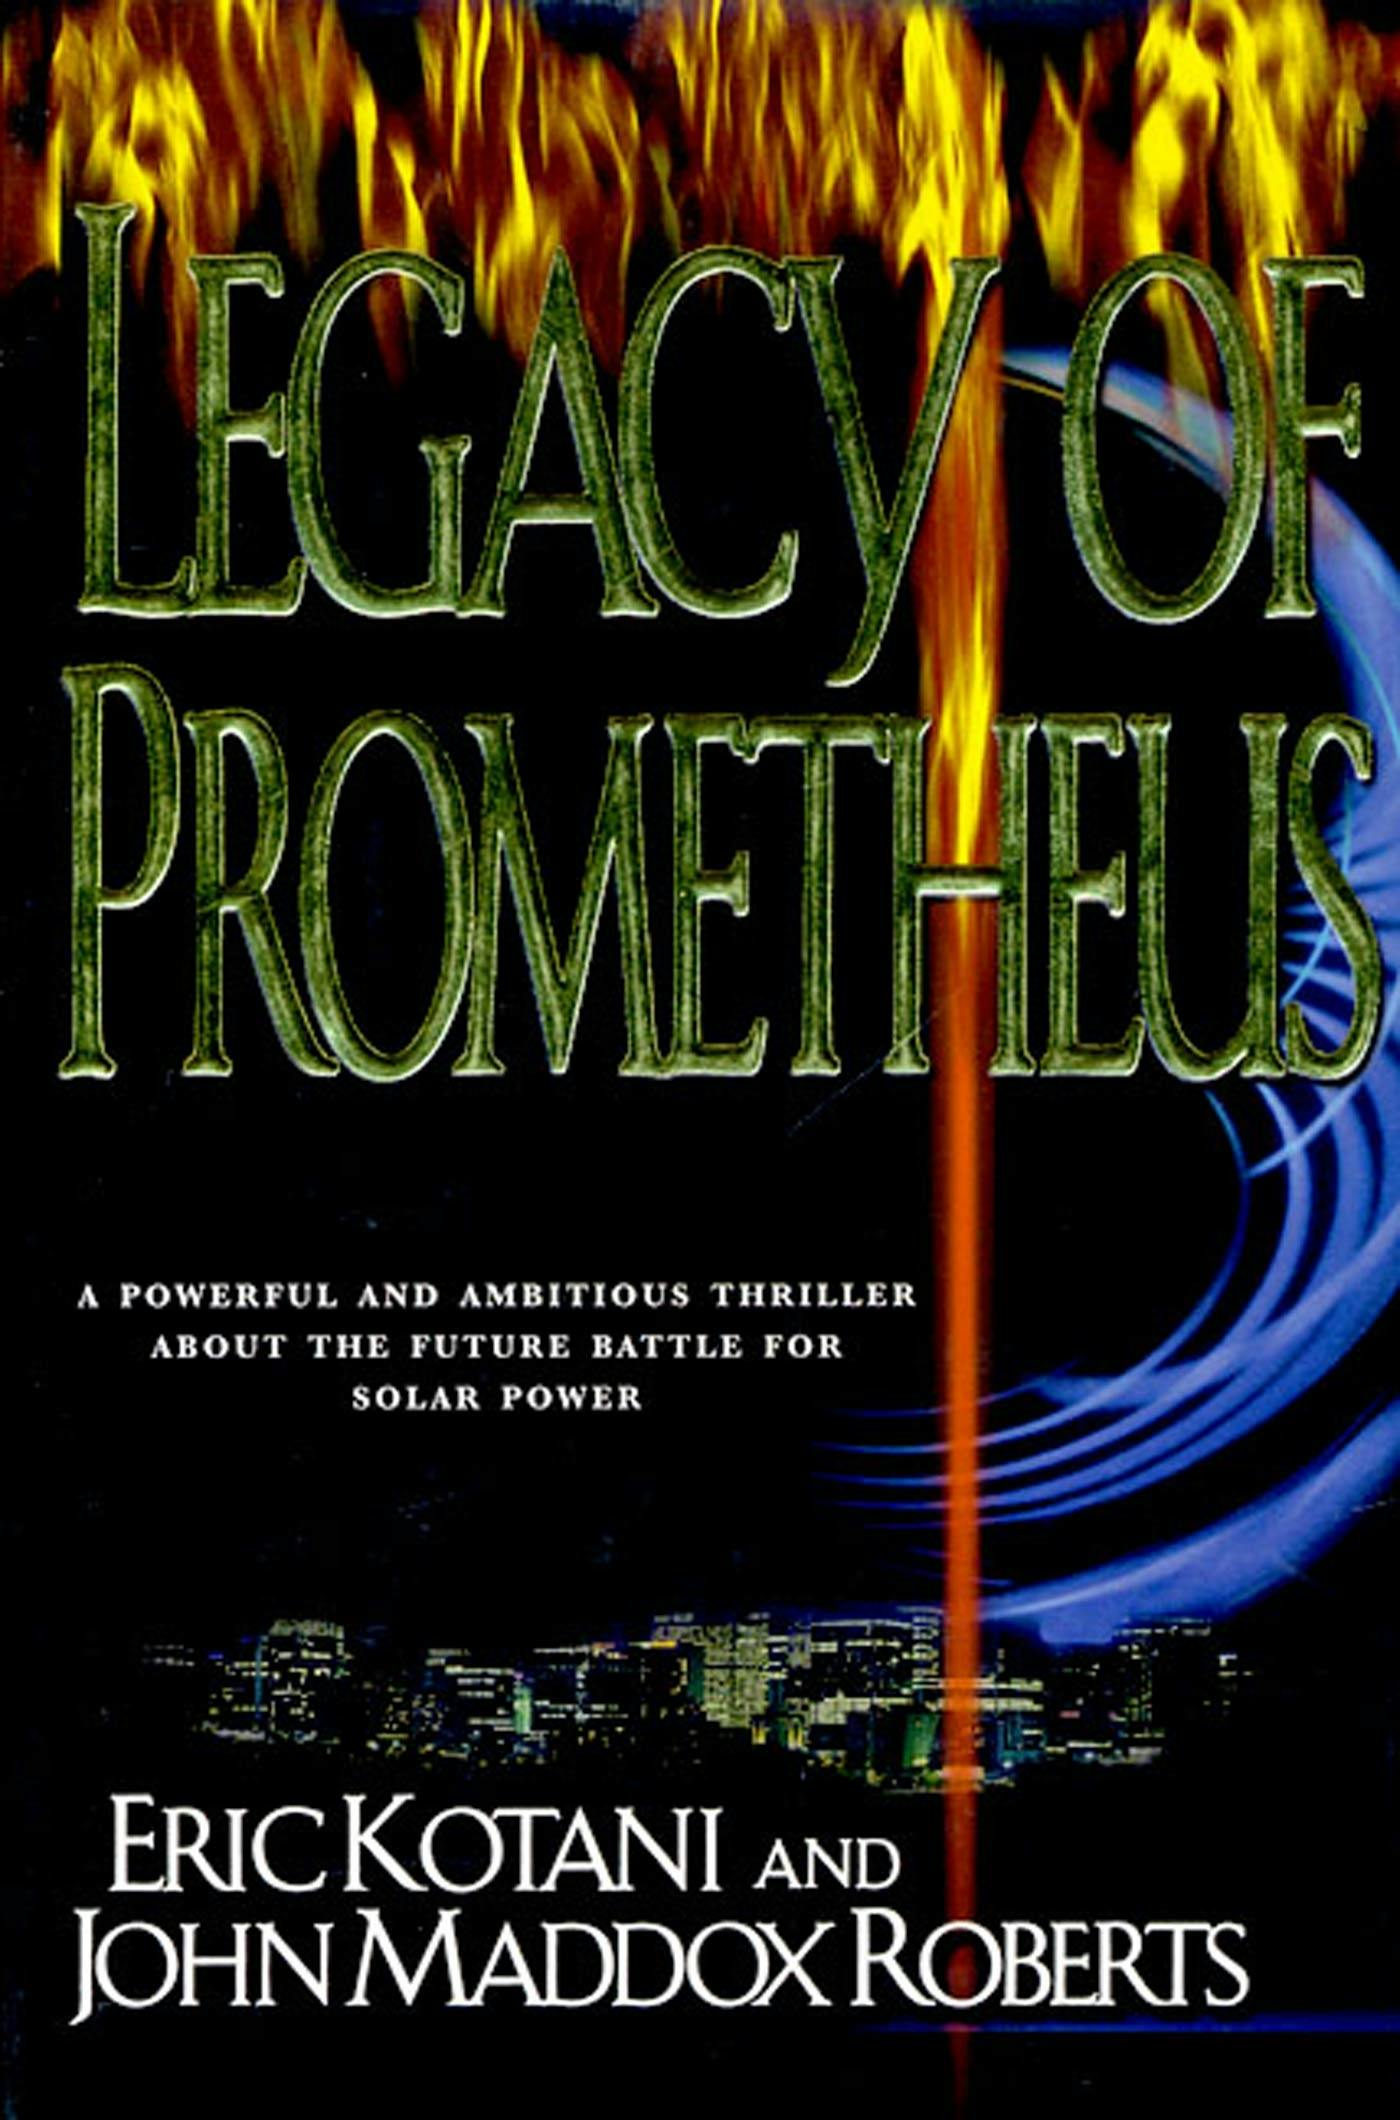 Cover for the book titled as: The Legacy of Prometheus